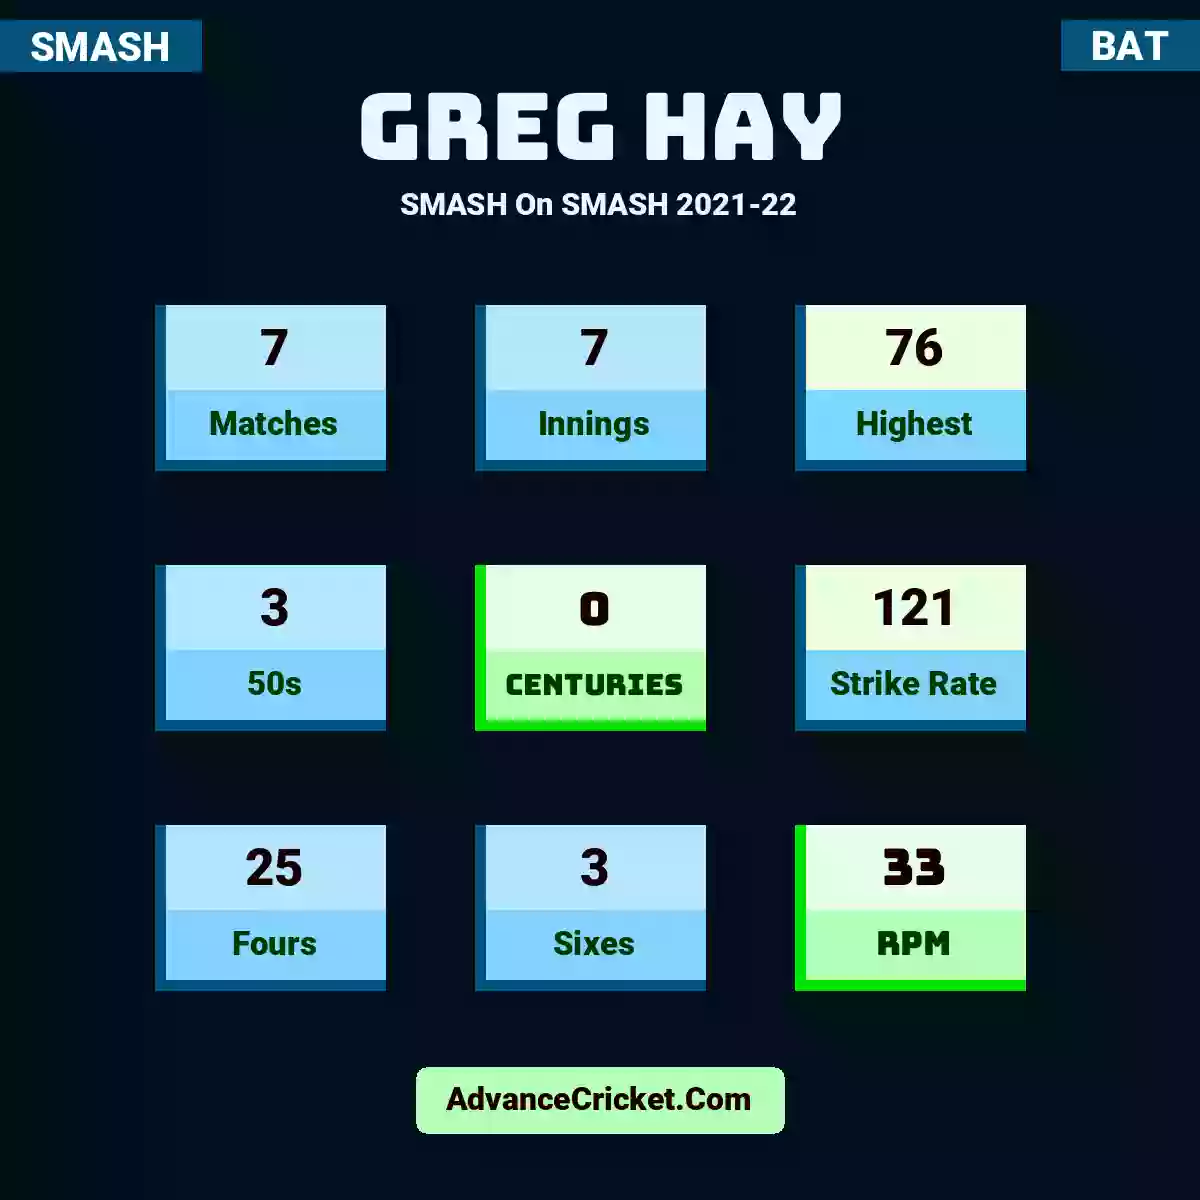 Greg Hay SMASH  On SMASH 2021-22, Greg Hay played 7 matches, scored 76 runs as highest, 3 half-centuries, and 0 centuries, with a strike rate of 121. G.Hay hit 25 fours and 3 sixes, with an RPM of 33.